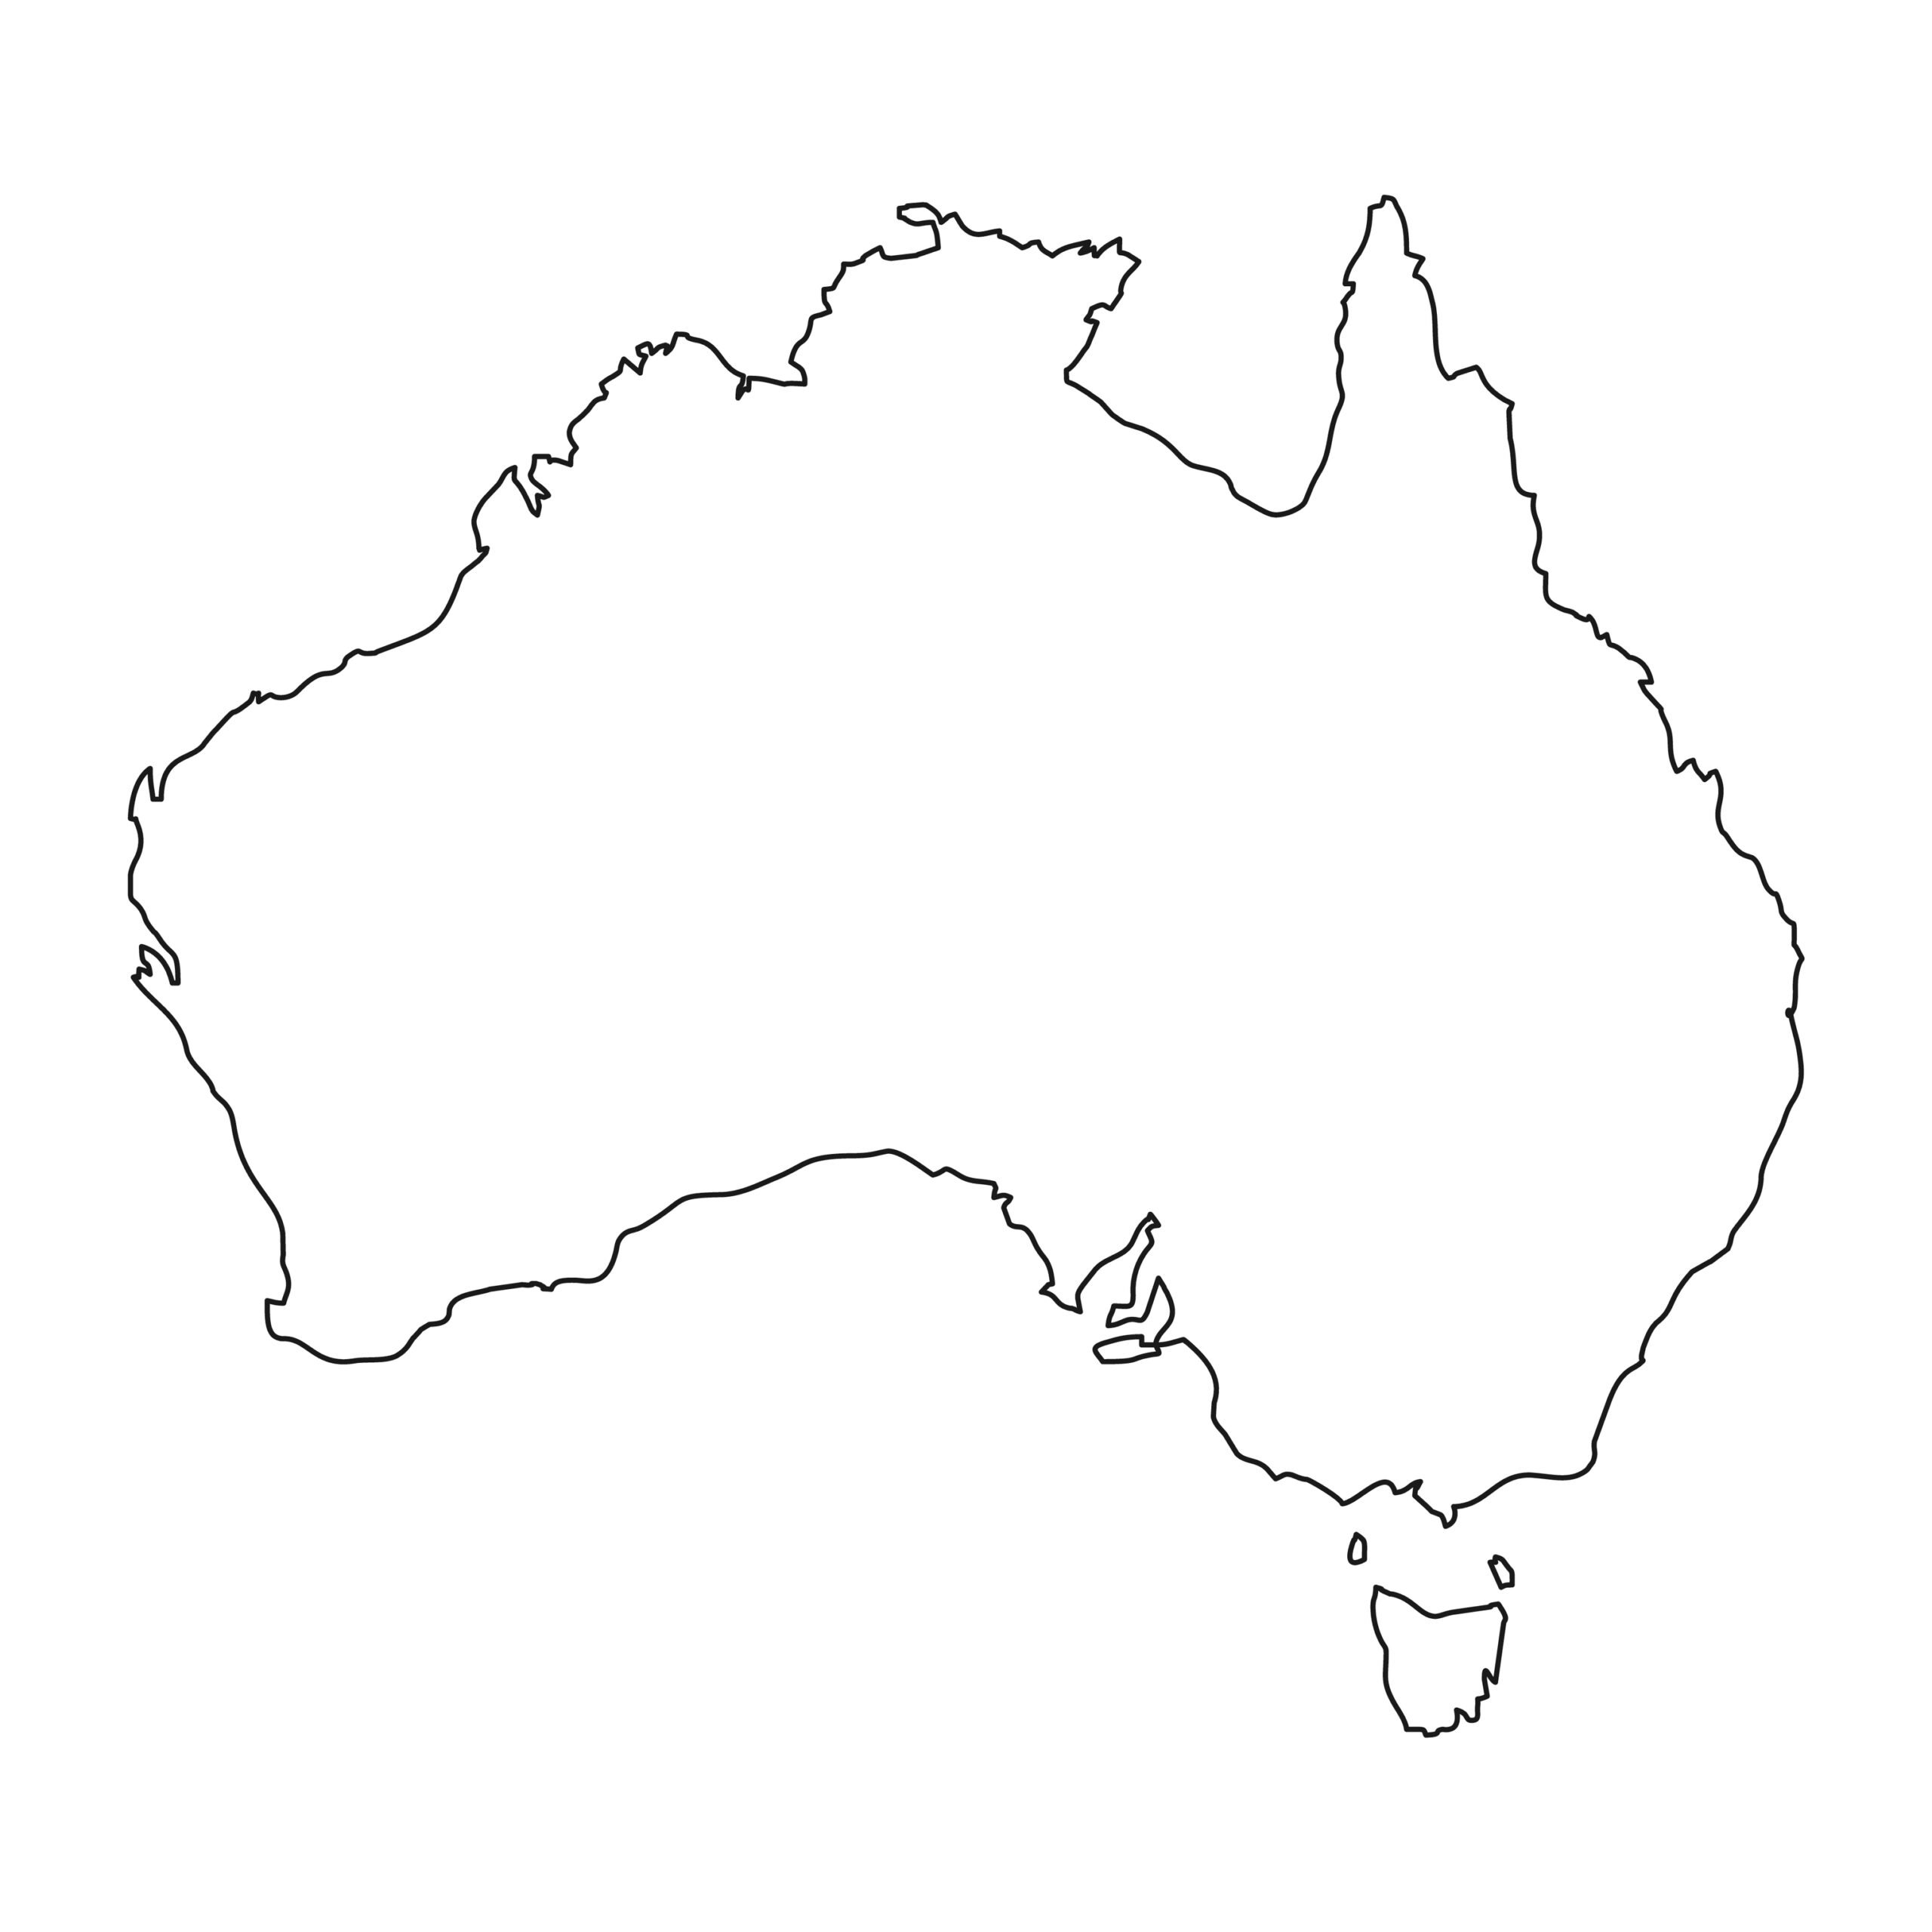 The outline of a map of Australia